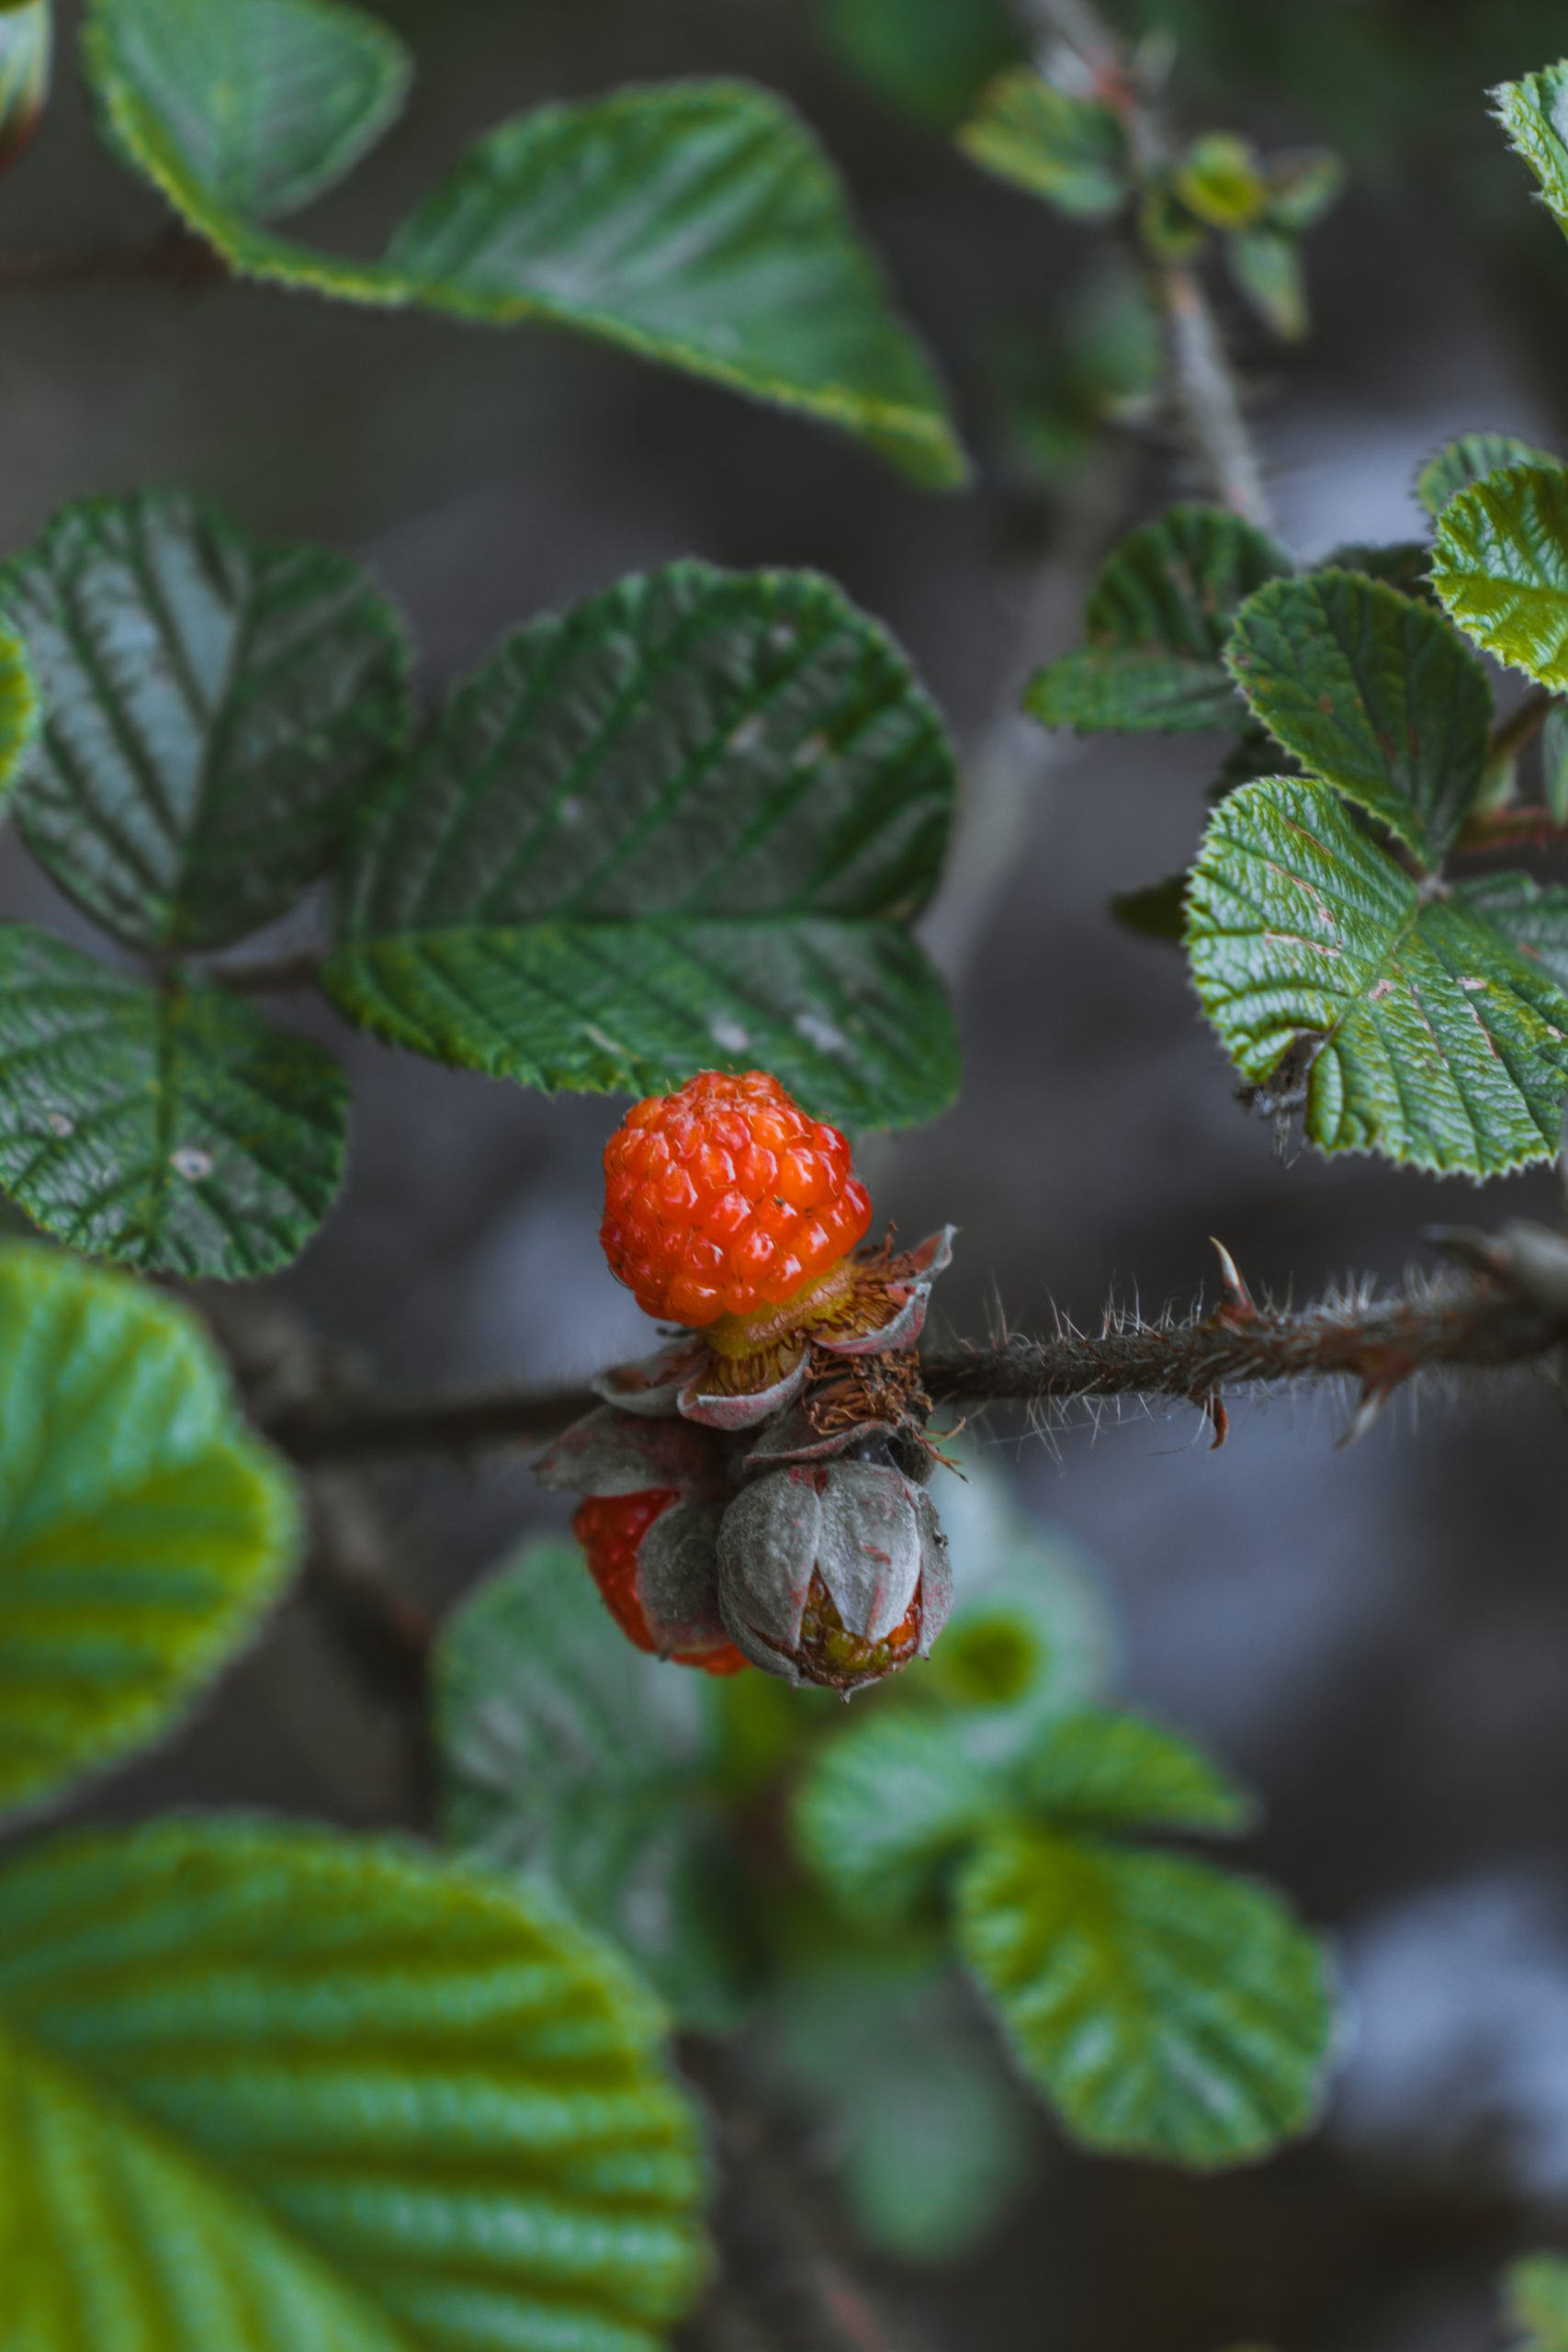 Berry of a plant